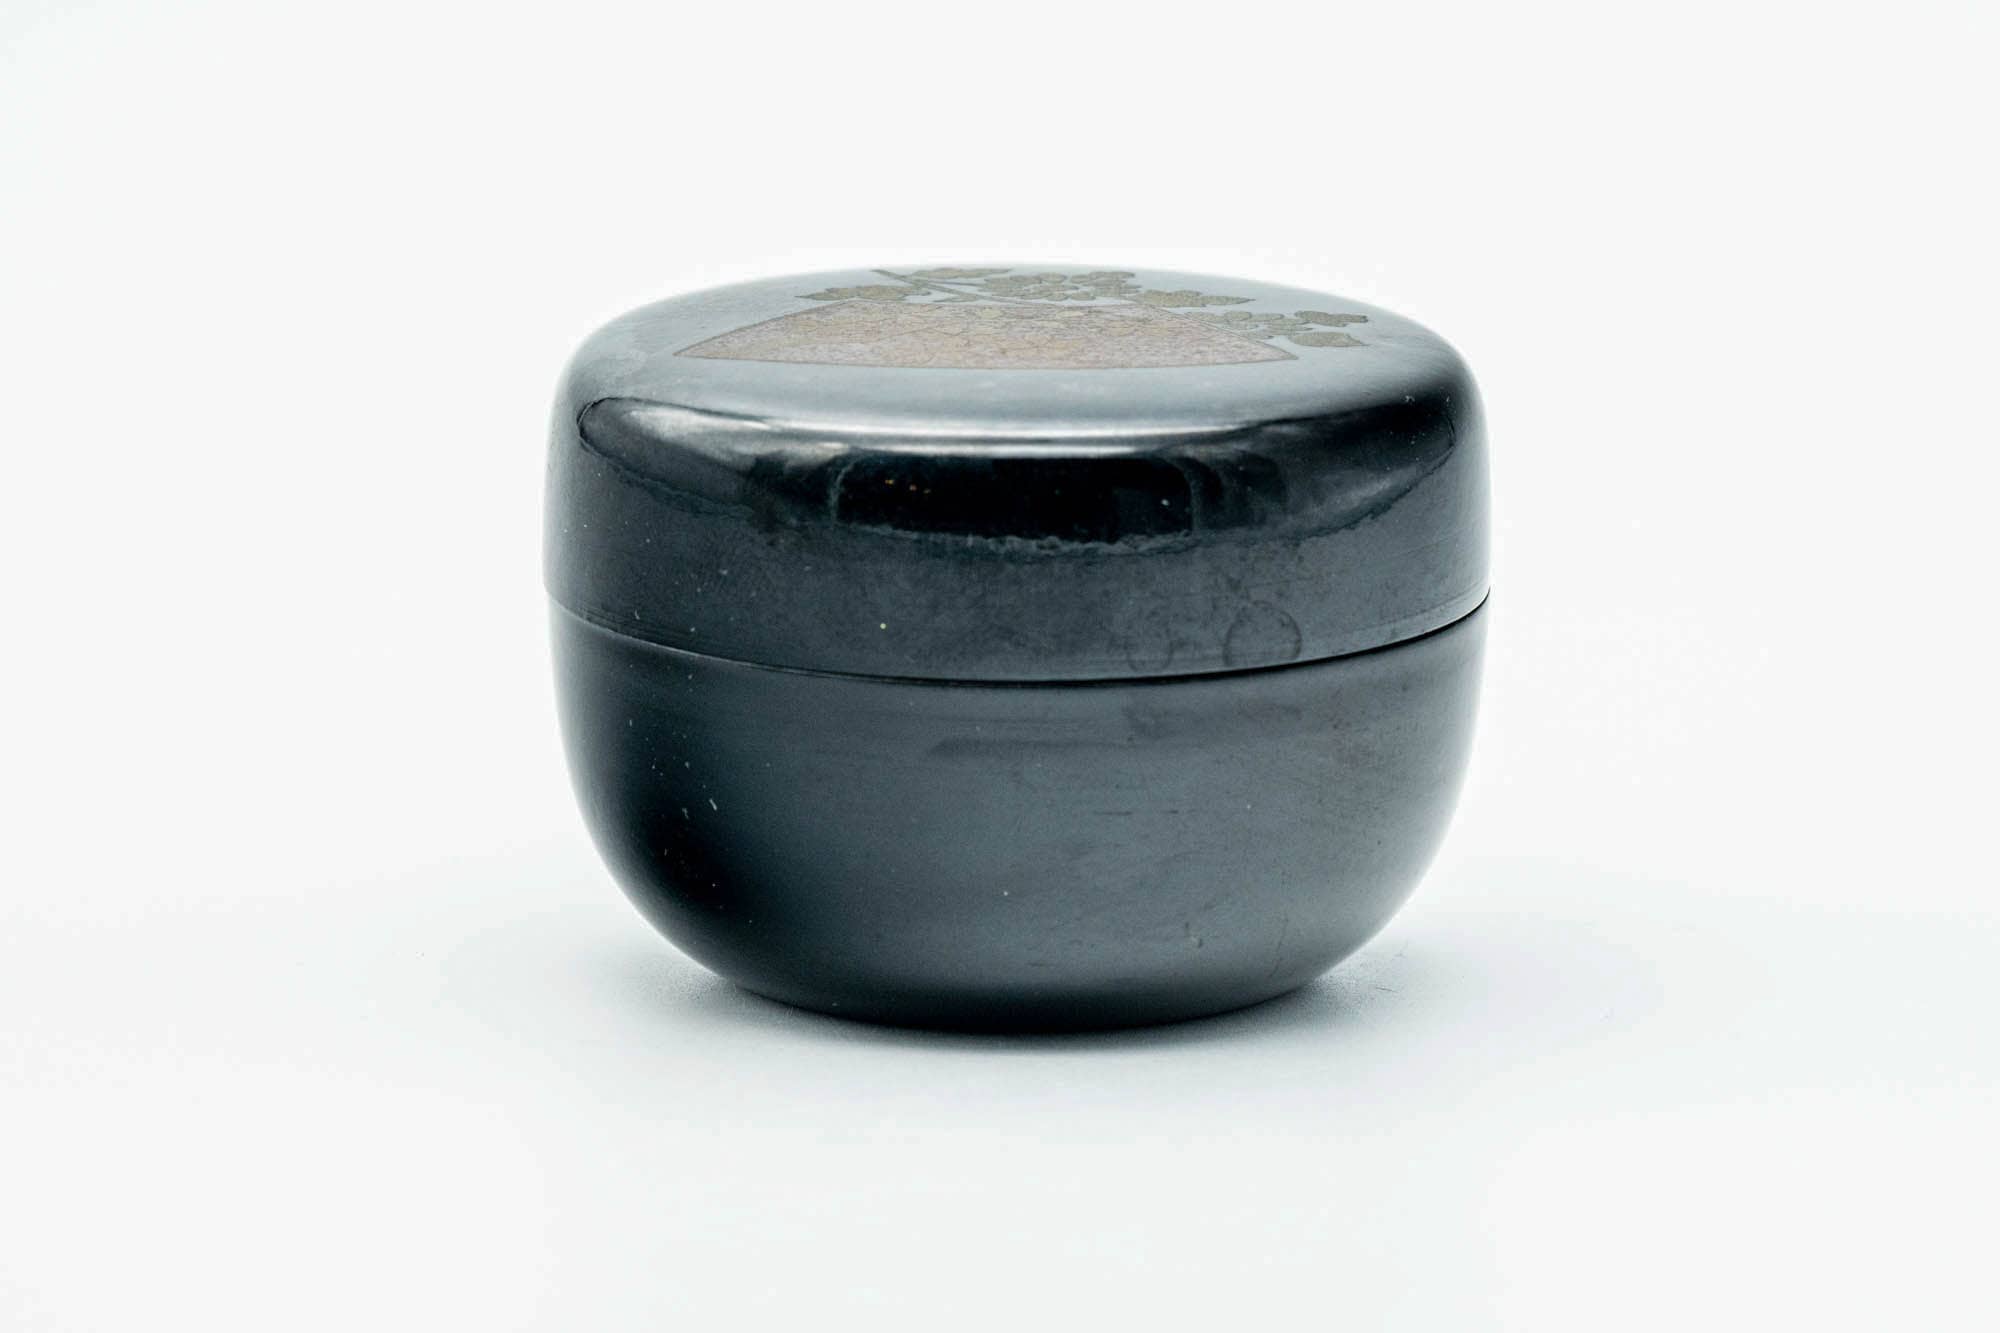 Japanese Natsume - Floral Painted Black Lacquered Matcha Tea Caddy - 70ml